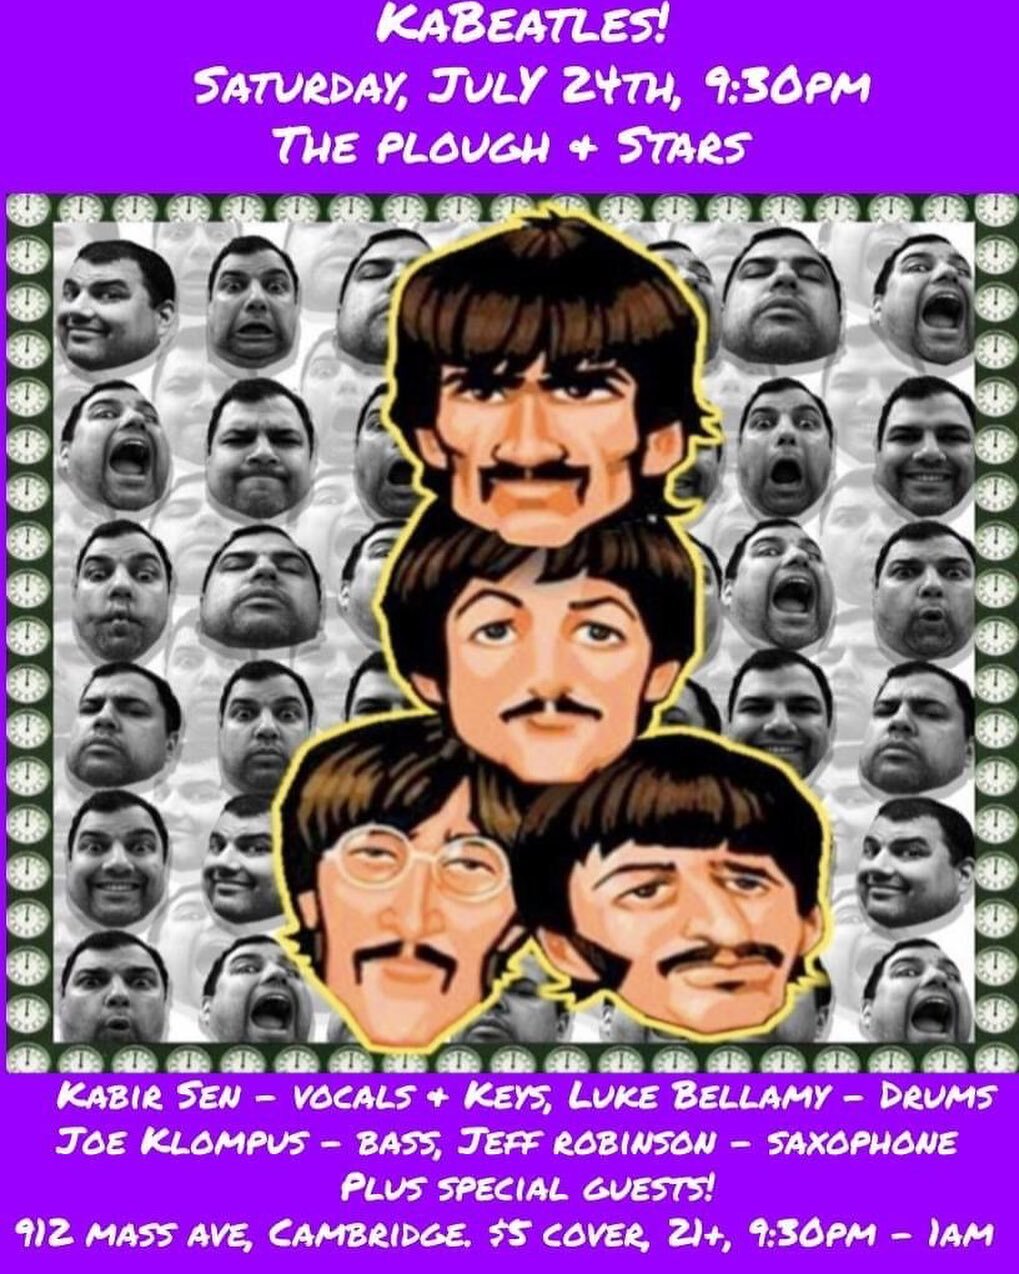 After a year and a half hiatus due to the pandemic, I am so excited to announce that &quot;KaBeatles&quot; is back at @ploughandstarscambridge ! I will be doing a mash-up of Fab 4 classics with some original hip hop/soul tunes plus some other covers.